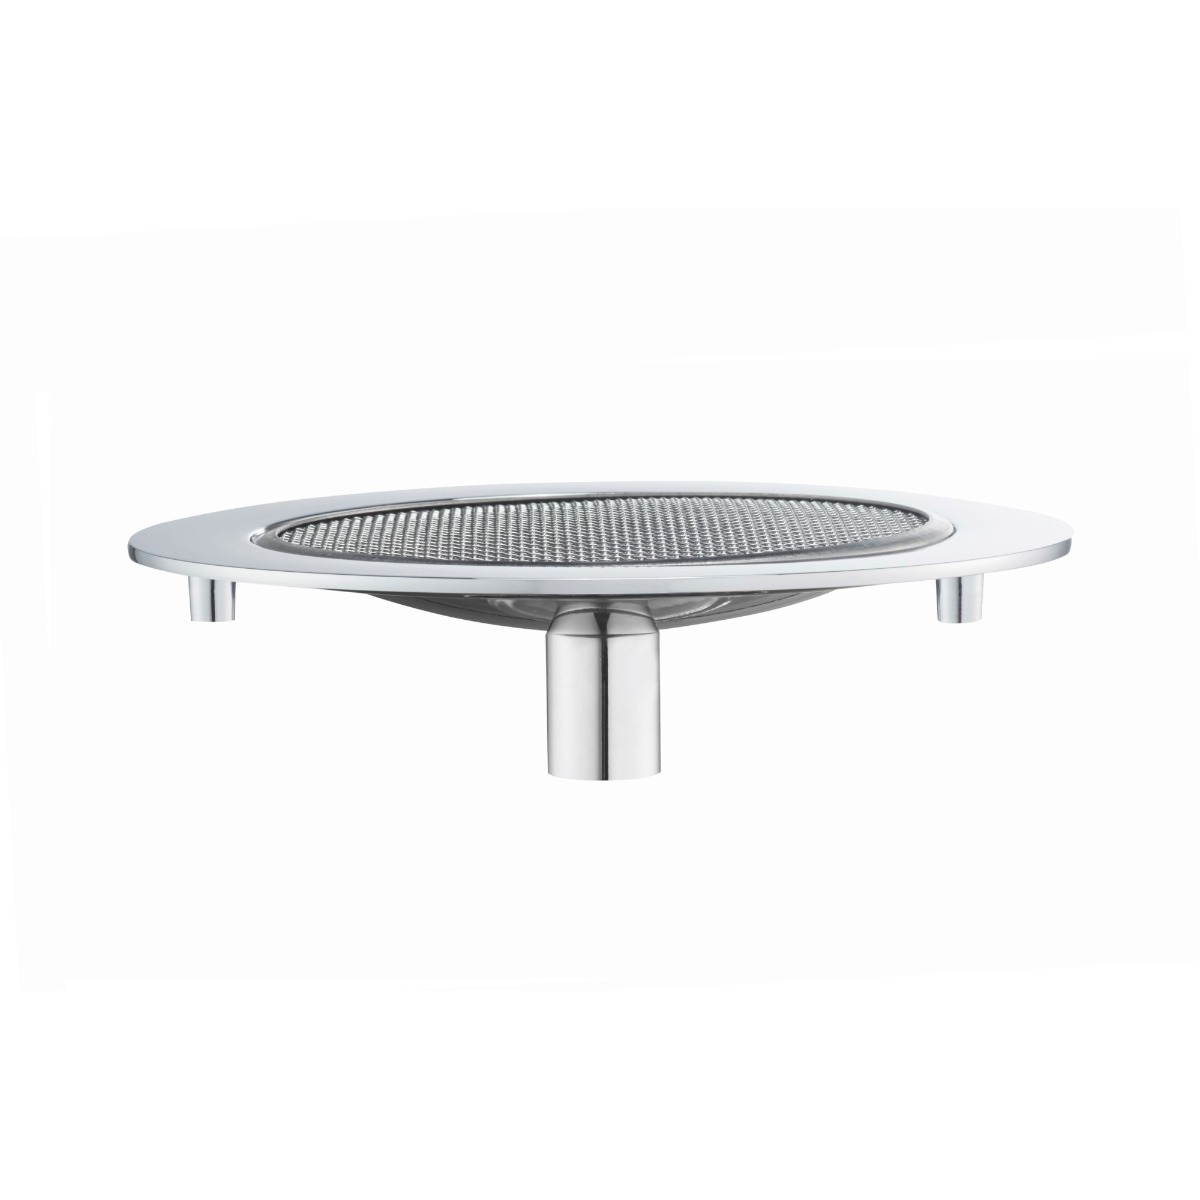 Zip HydroTap Separate Tap Font and Drip Tray in Bright Chrome 93441UK